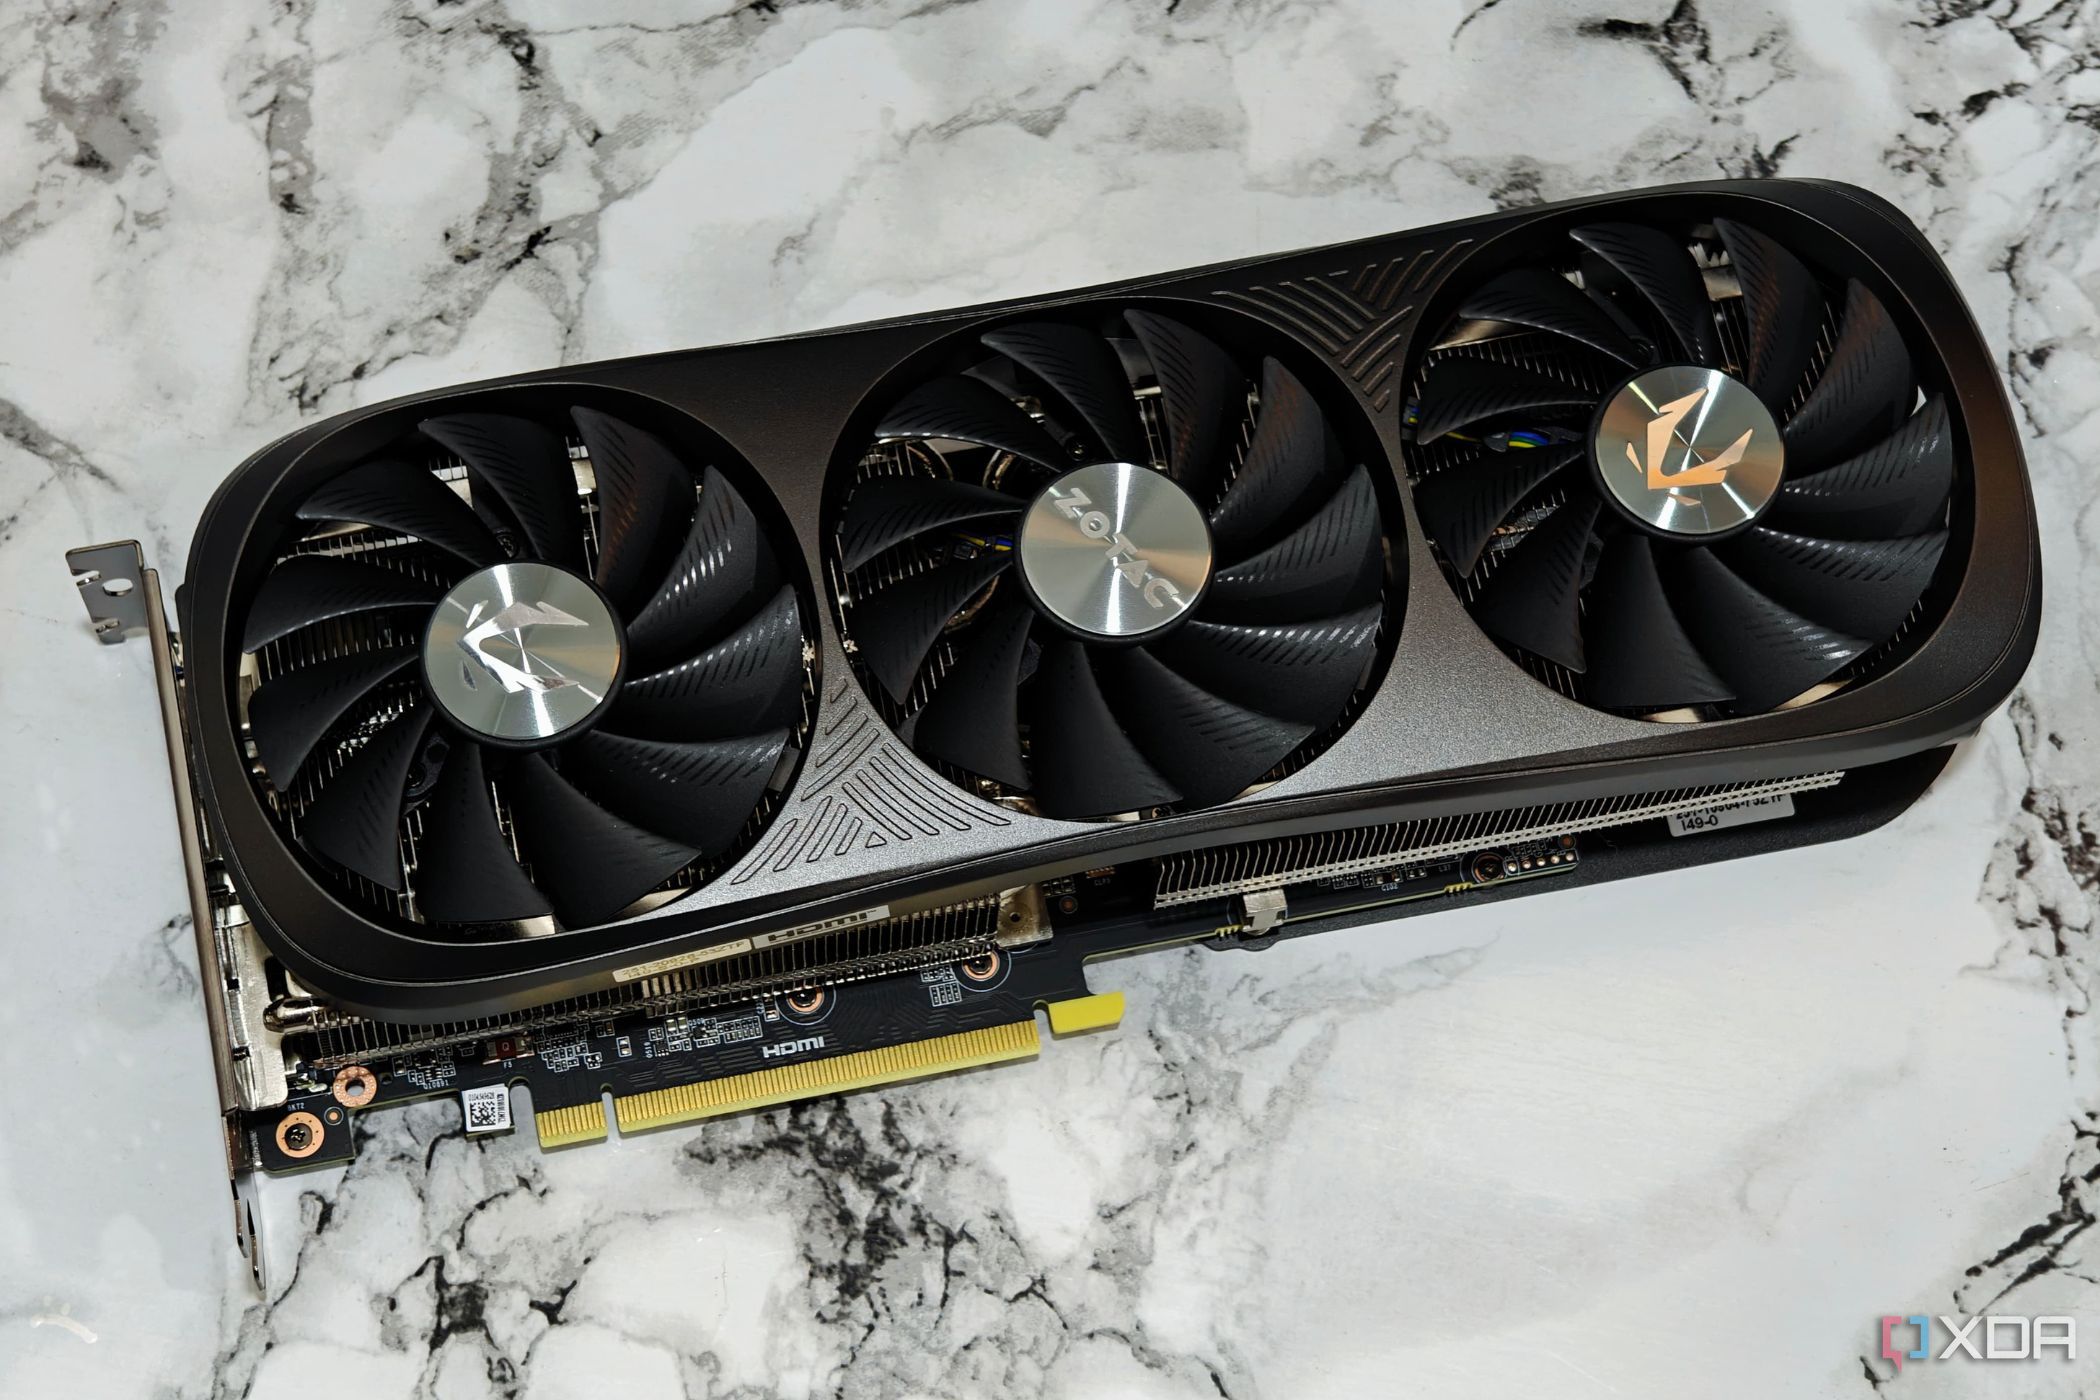 An image showing the Zotac Gaming GeForce RTX 4070 Super GPU kept on a table.